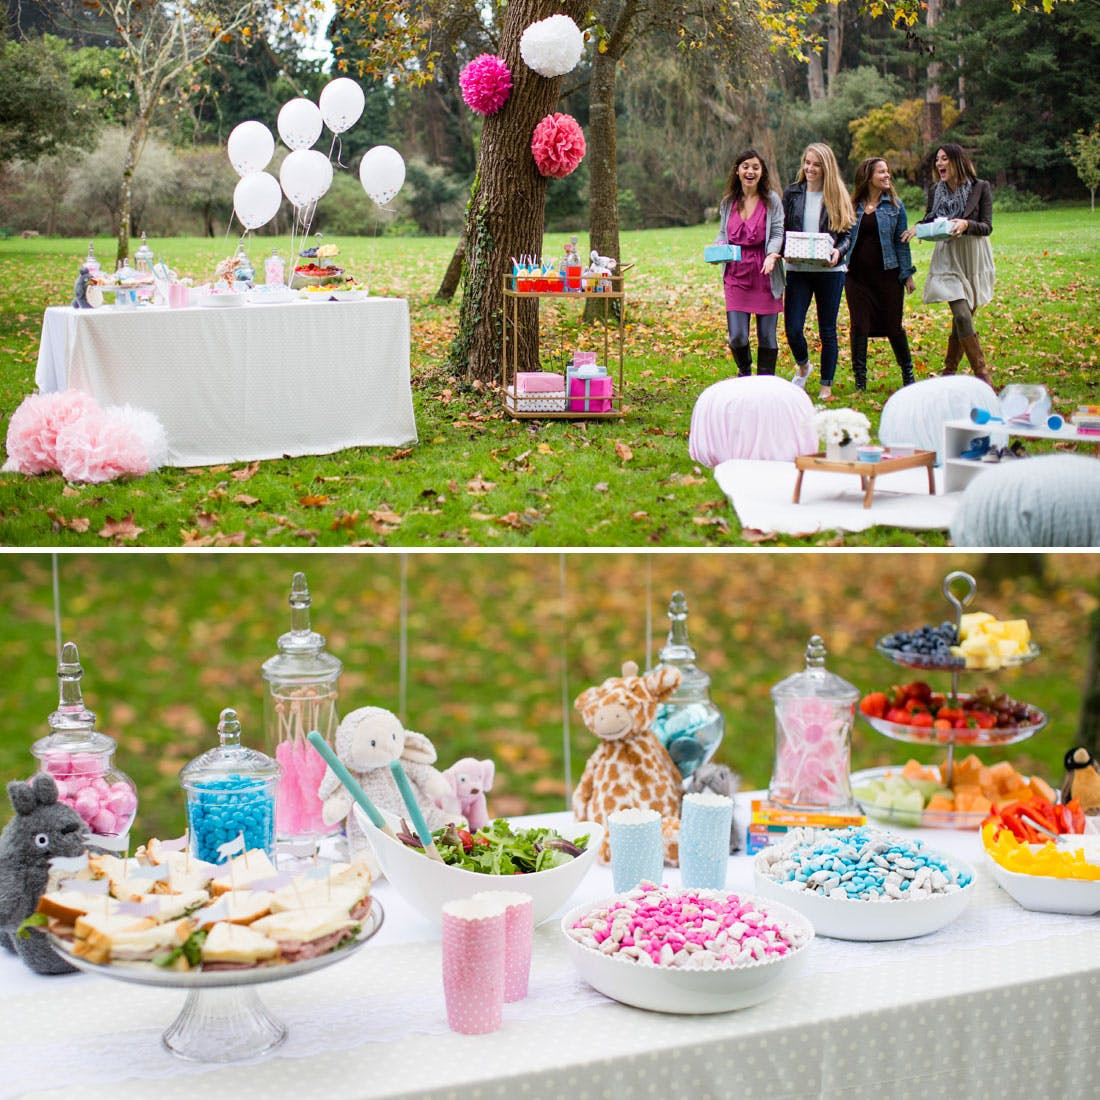 Outside Baby Shower Decoration Ideas
 8 Must Haves for a Springy Outdoor Baby Shower